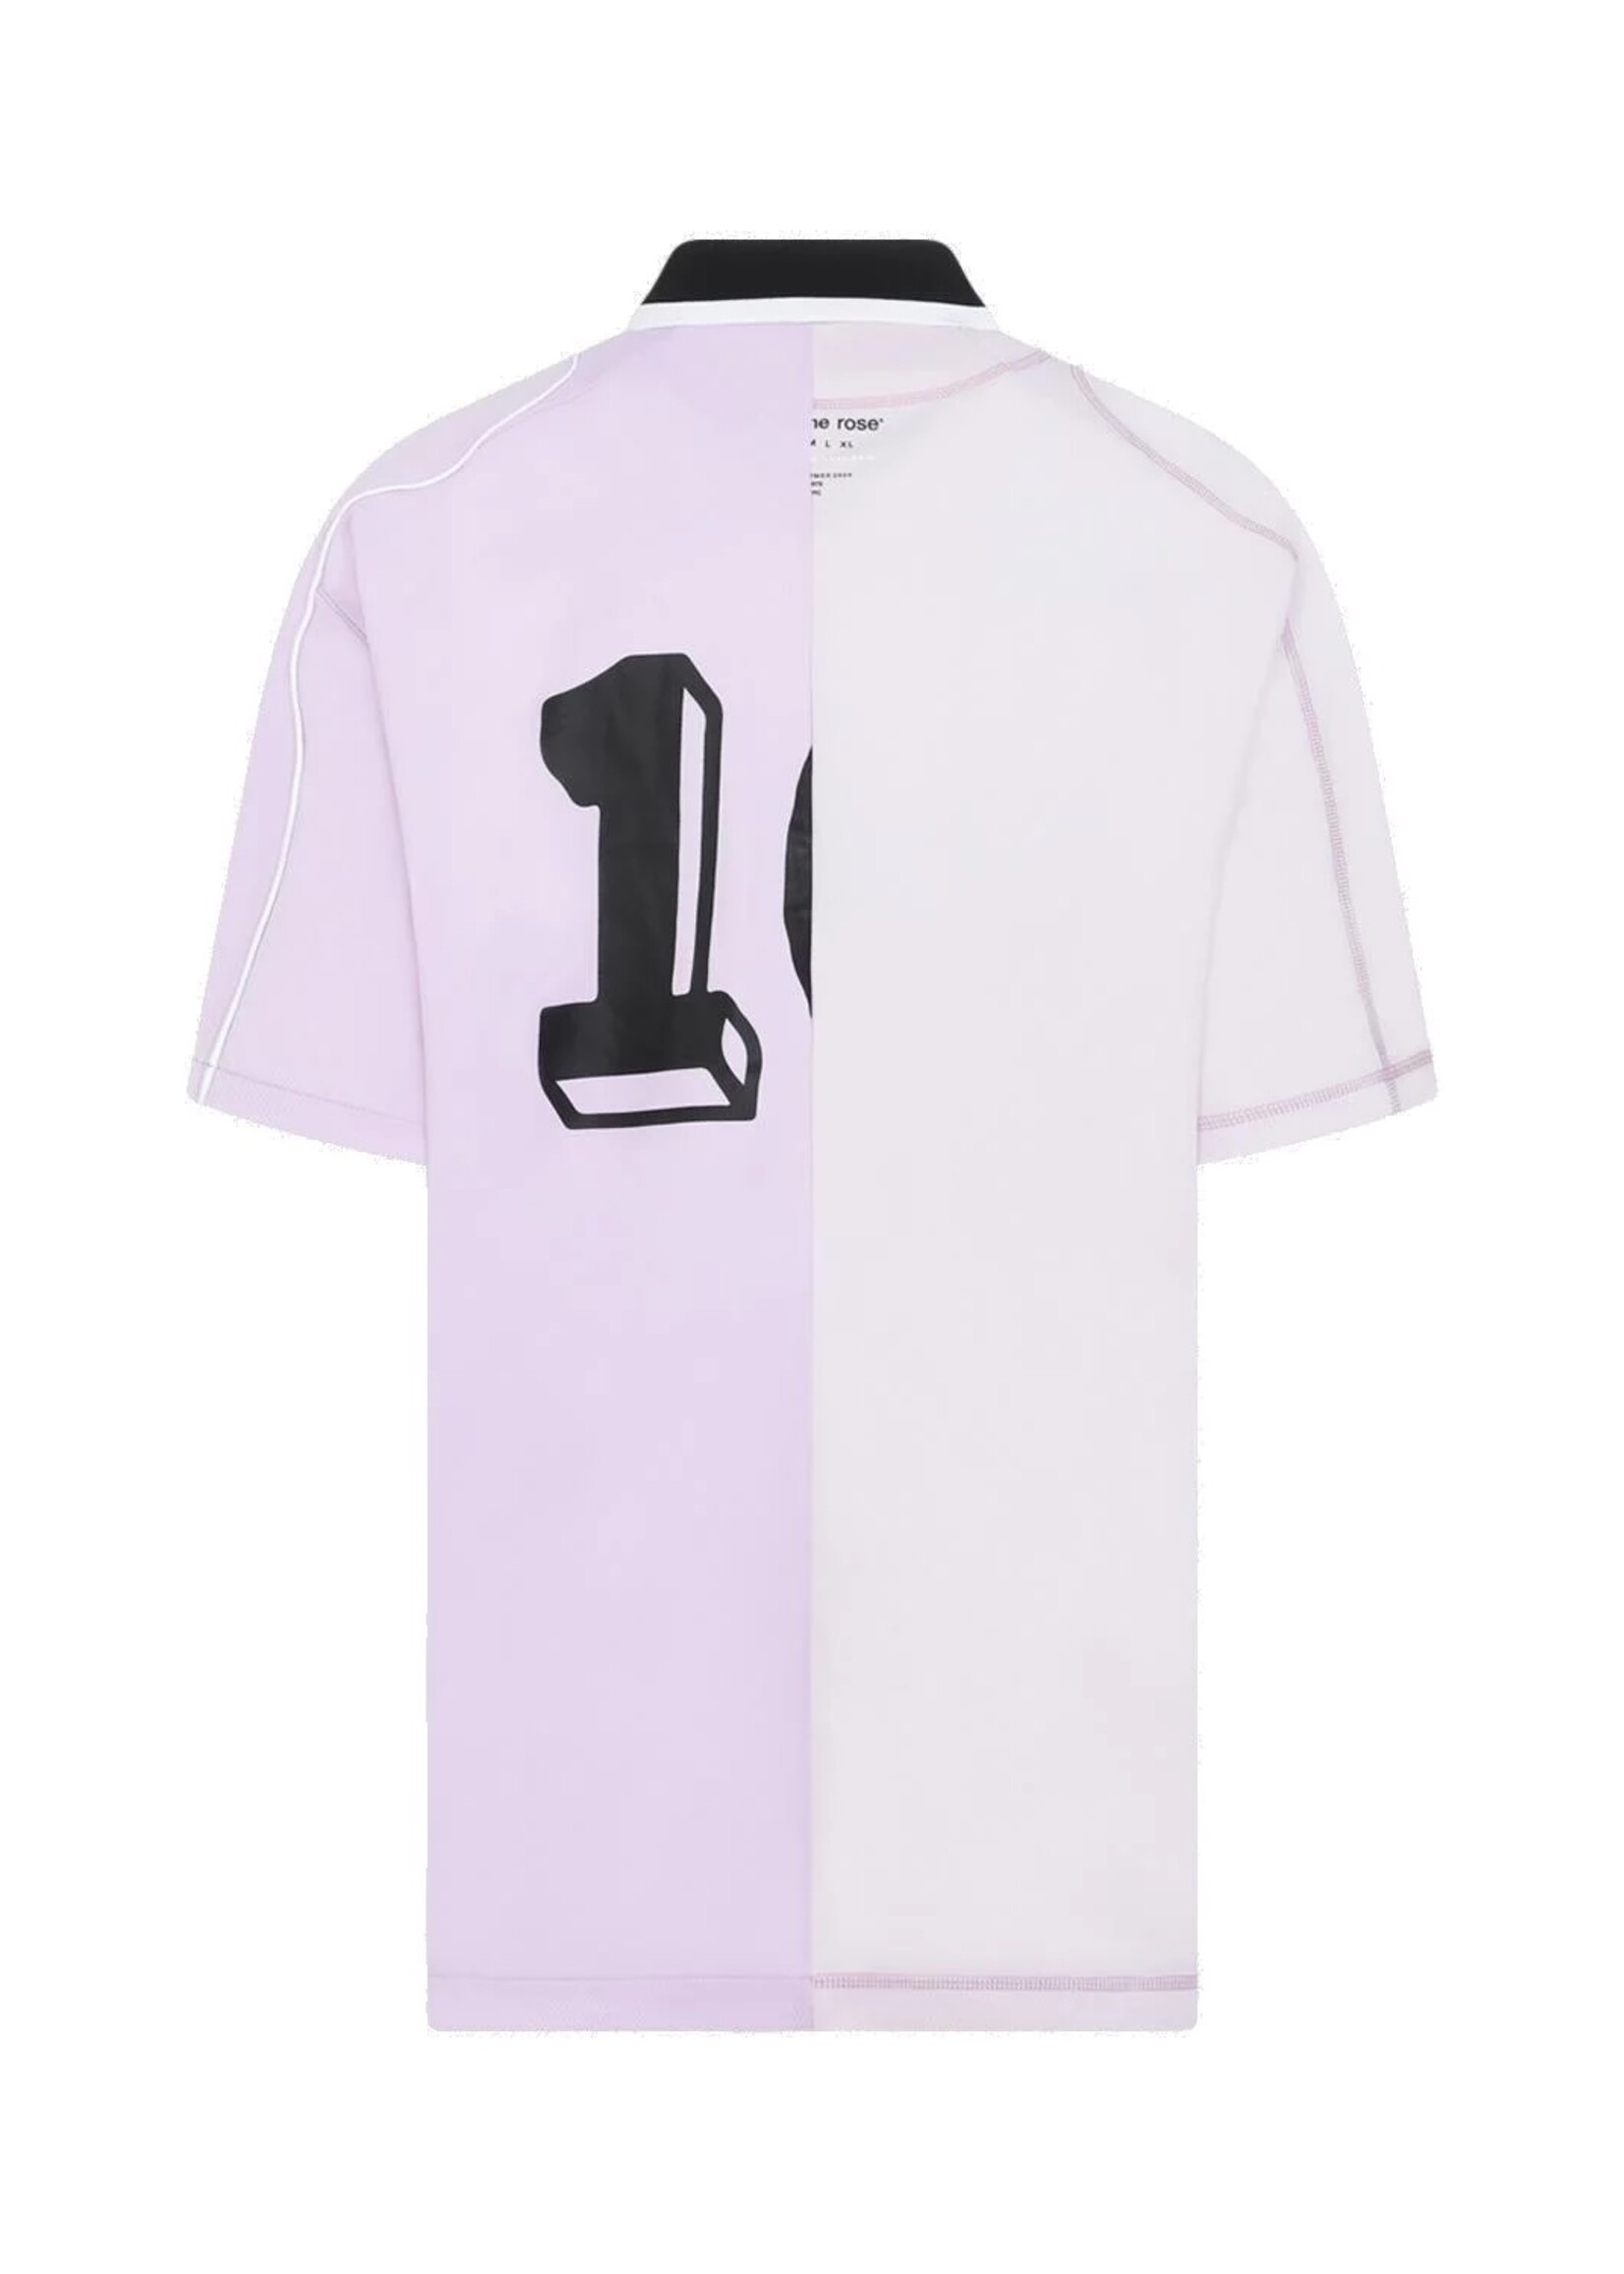 MARTINE ROSE Half and Half Football Top in Lilac